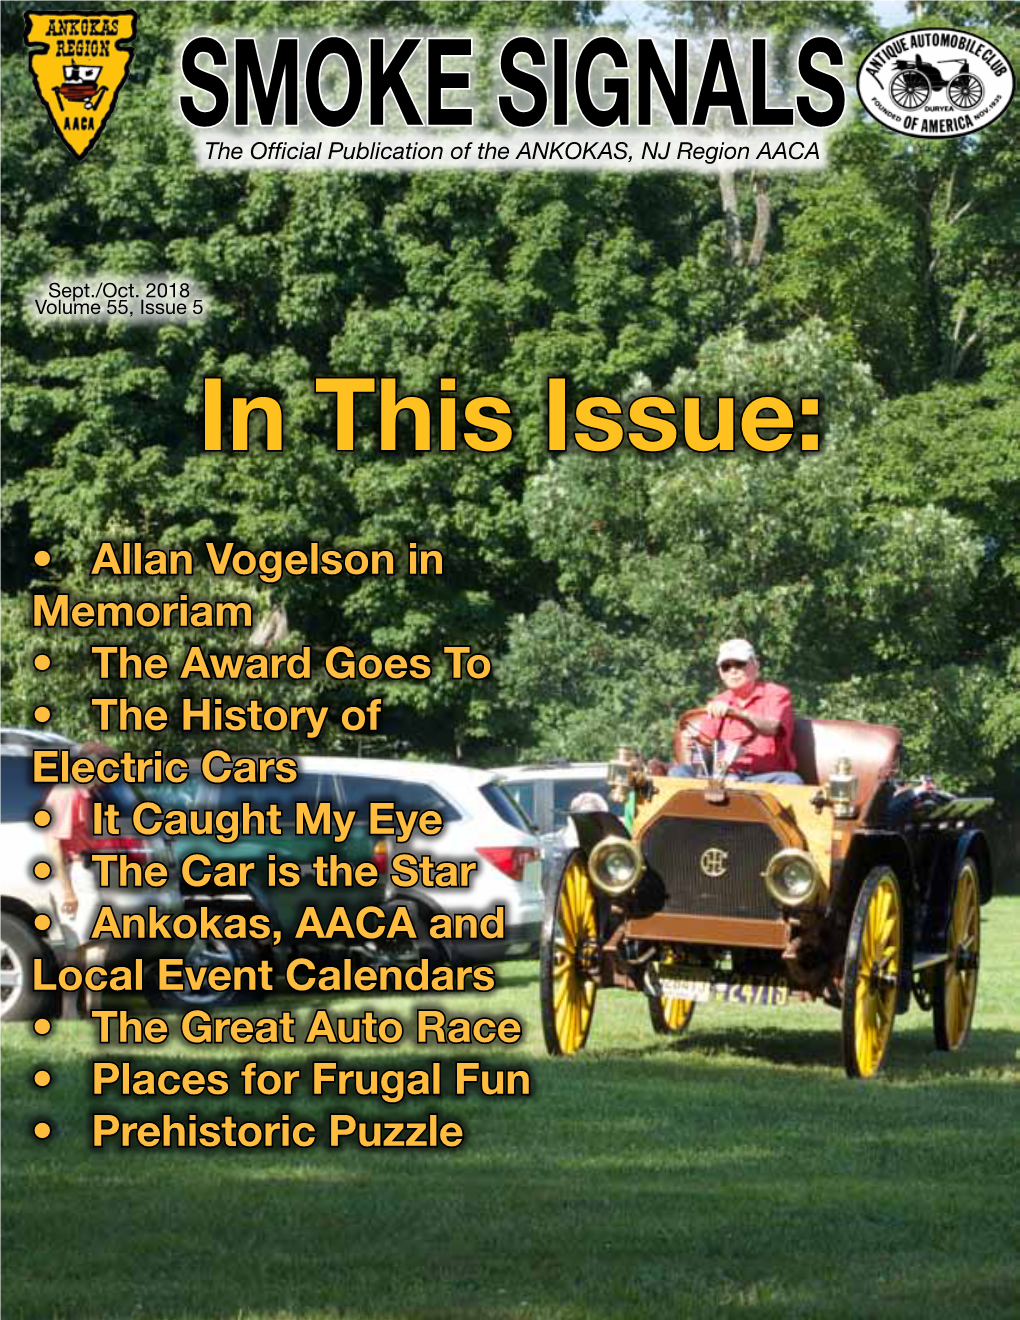 The Car Is the Star • Ankokas, AACA and Local Event Calendars • the Great Auto Race • Places for Frugal Fun • Prehistoric Puzzle in This Month’S Issue